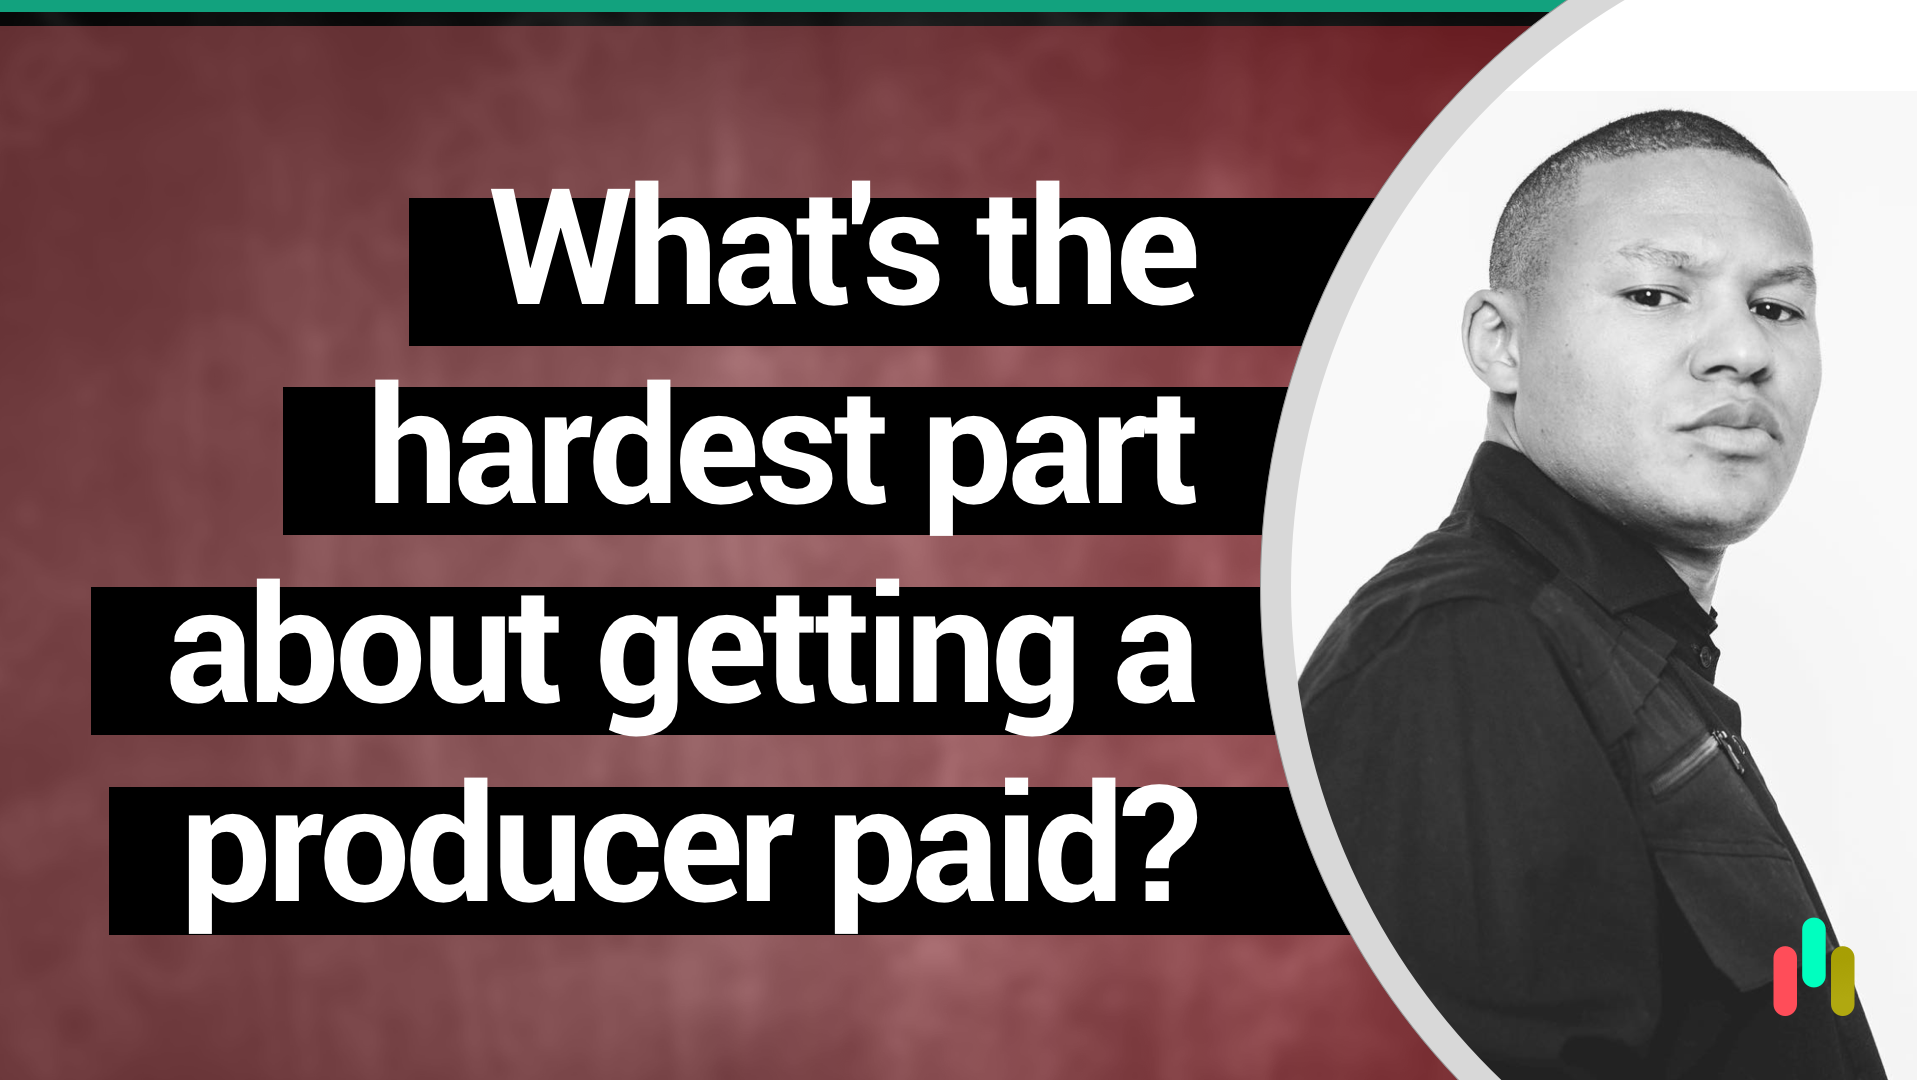 Manager, entrepreneur, and @themelodyapp Co-Founder/Head of Business Development & Marketing @loot_music_group answers the question: “What’s the hardest part of getting a producer paid?”??